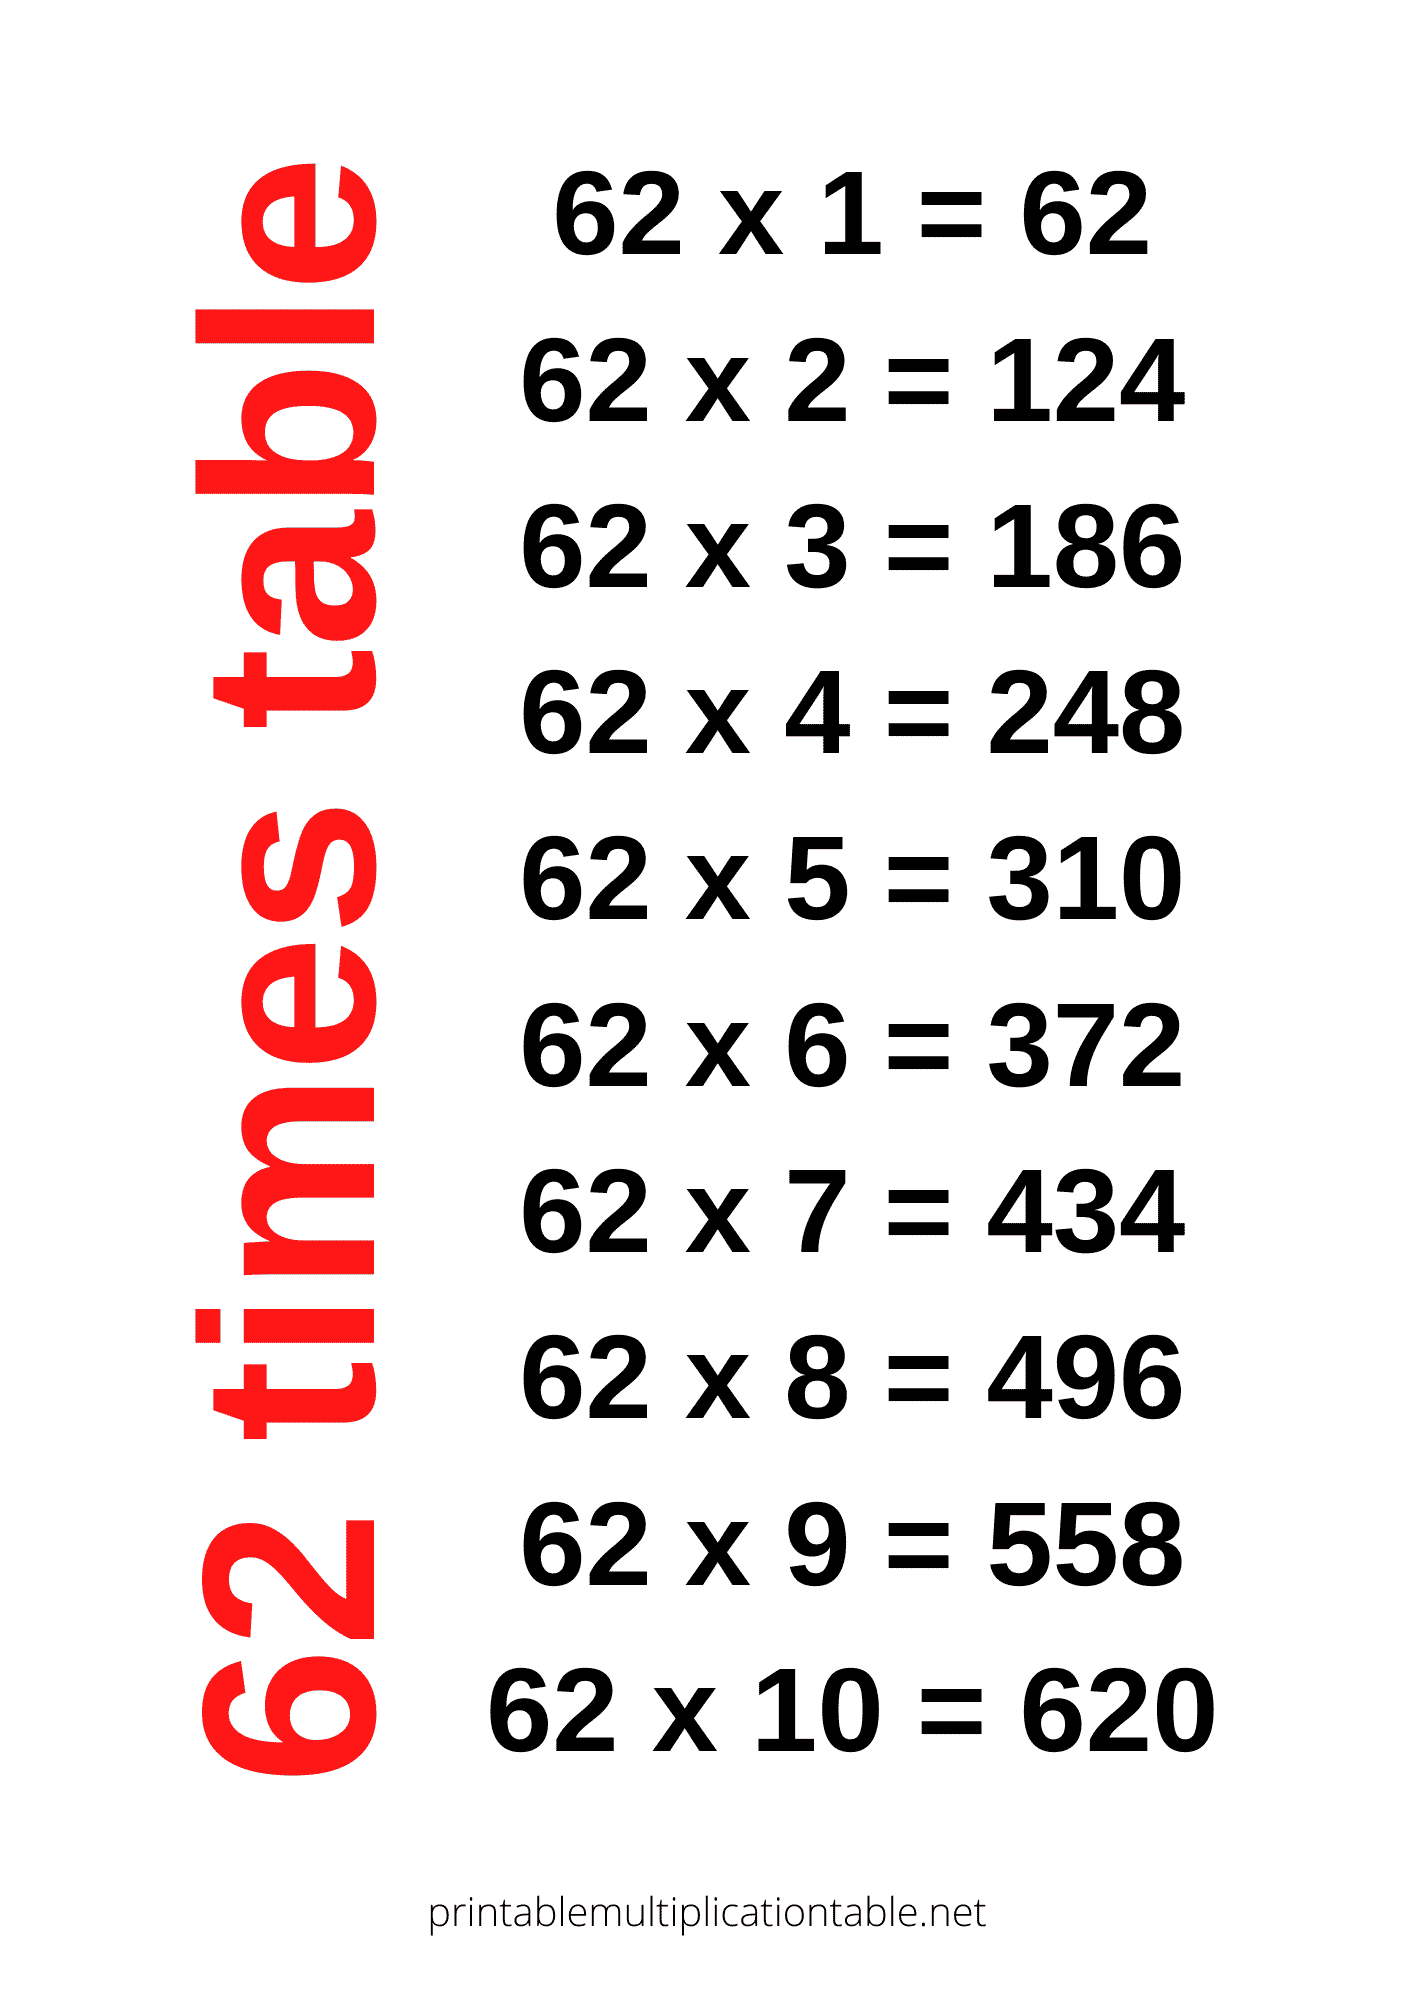 62 times table chart